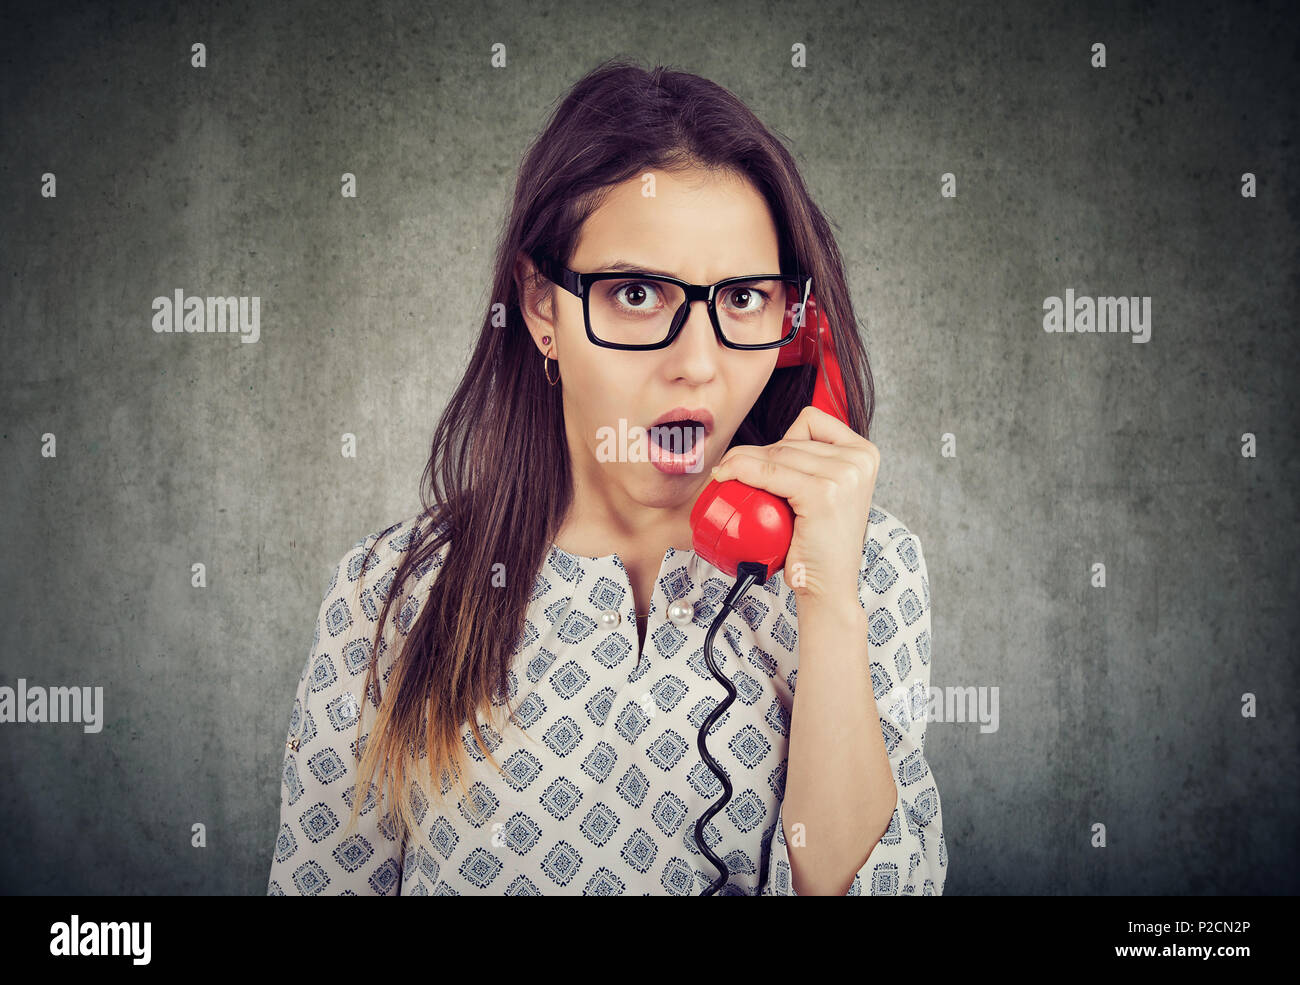 Amazed shocked young woman talking on a telephone Stock Photo